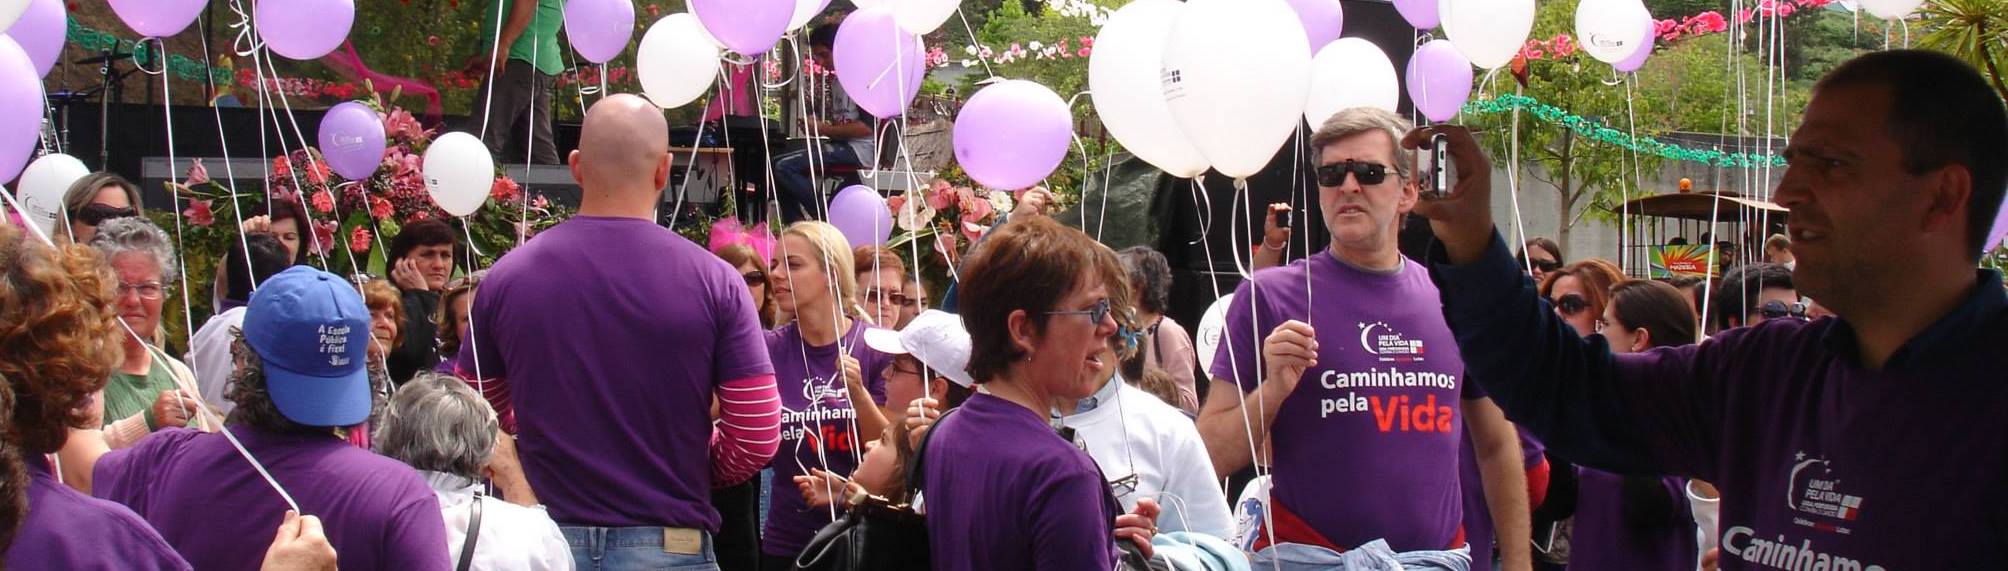 Global Relay For Life - American Cancer Society Resources